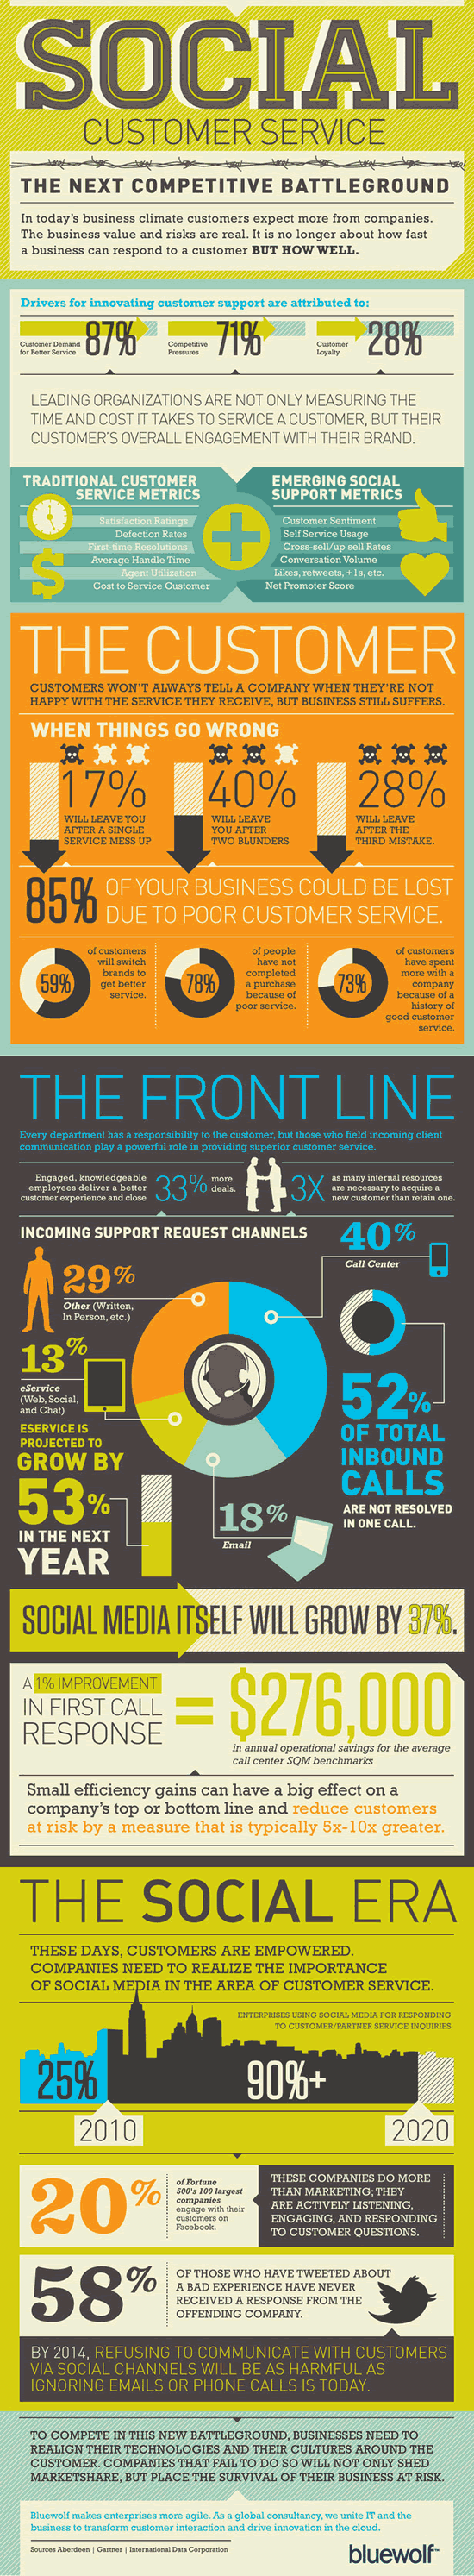 Social customer service infographic by Bluewolf